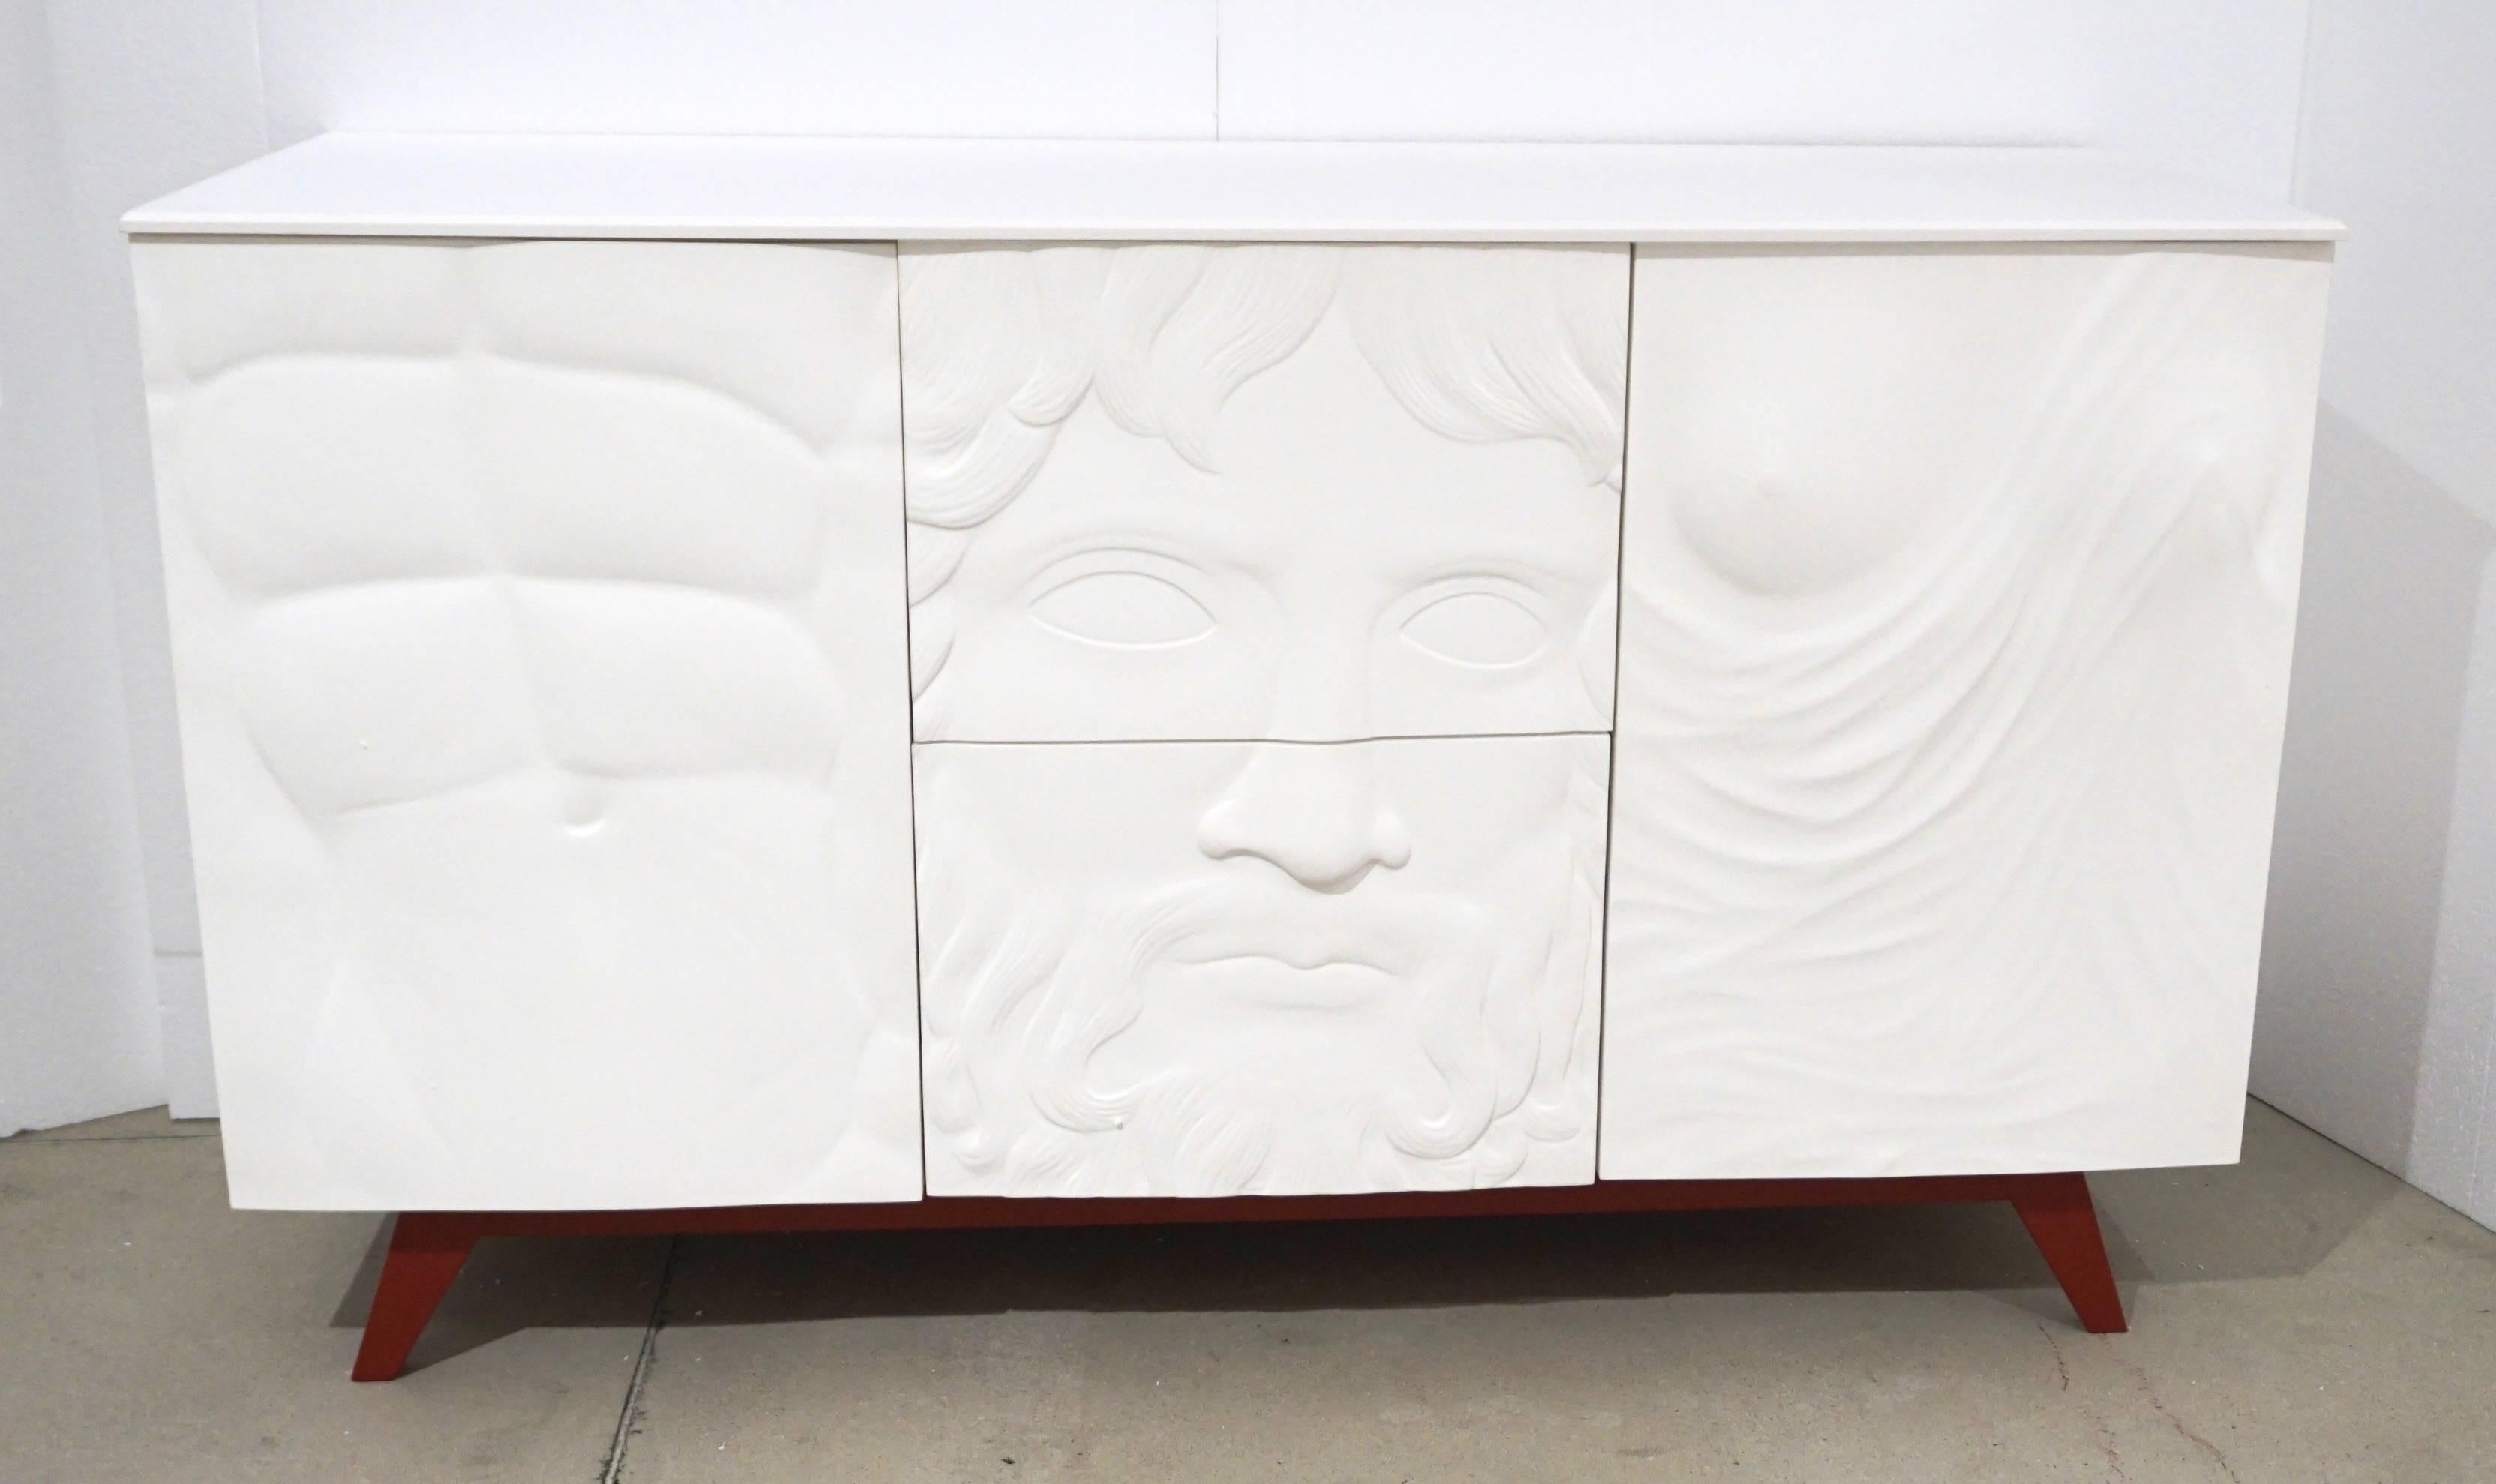 Exclusive made in Italy contemporary credenza or dresser with a Renaissance flair, the three front panels in bas-relief reinterpreting iconic ancient Green and Roman art.
High quality of execution and materials, the handcrafted white lacquered